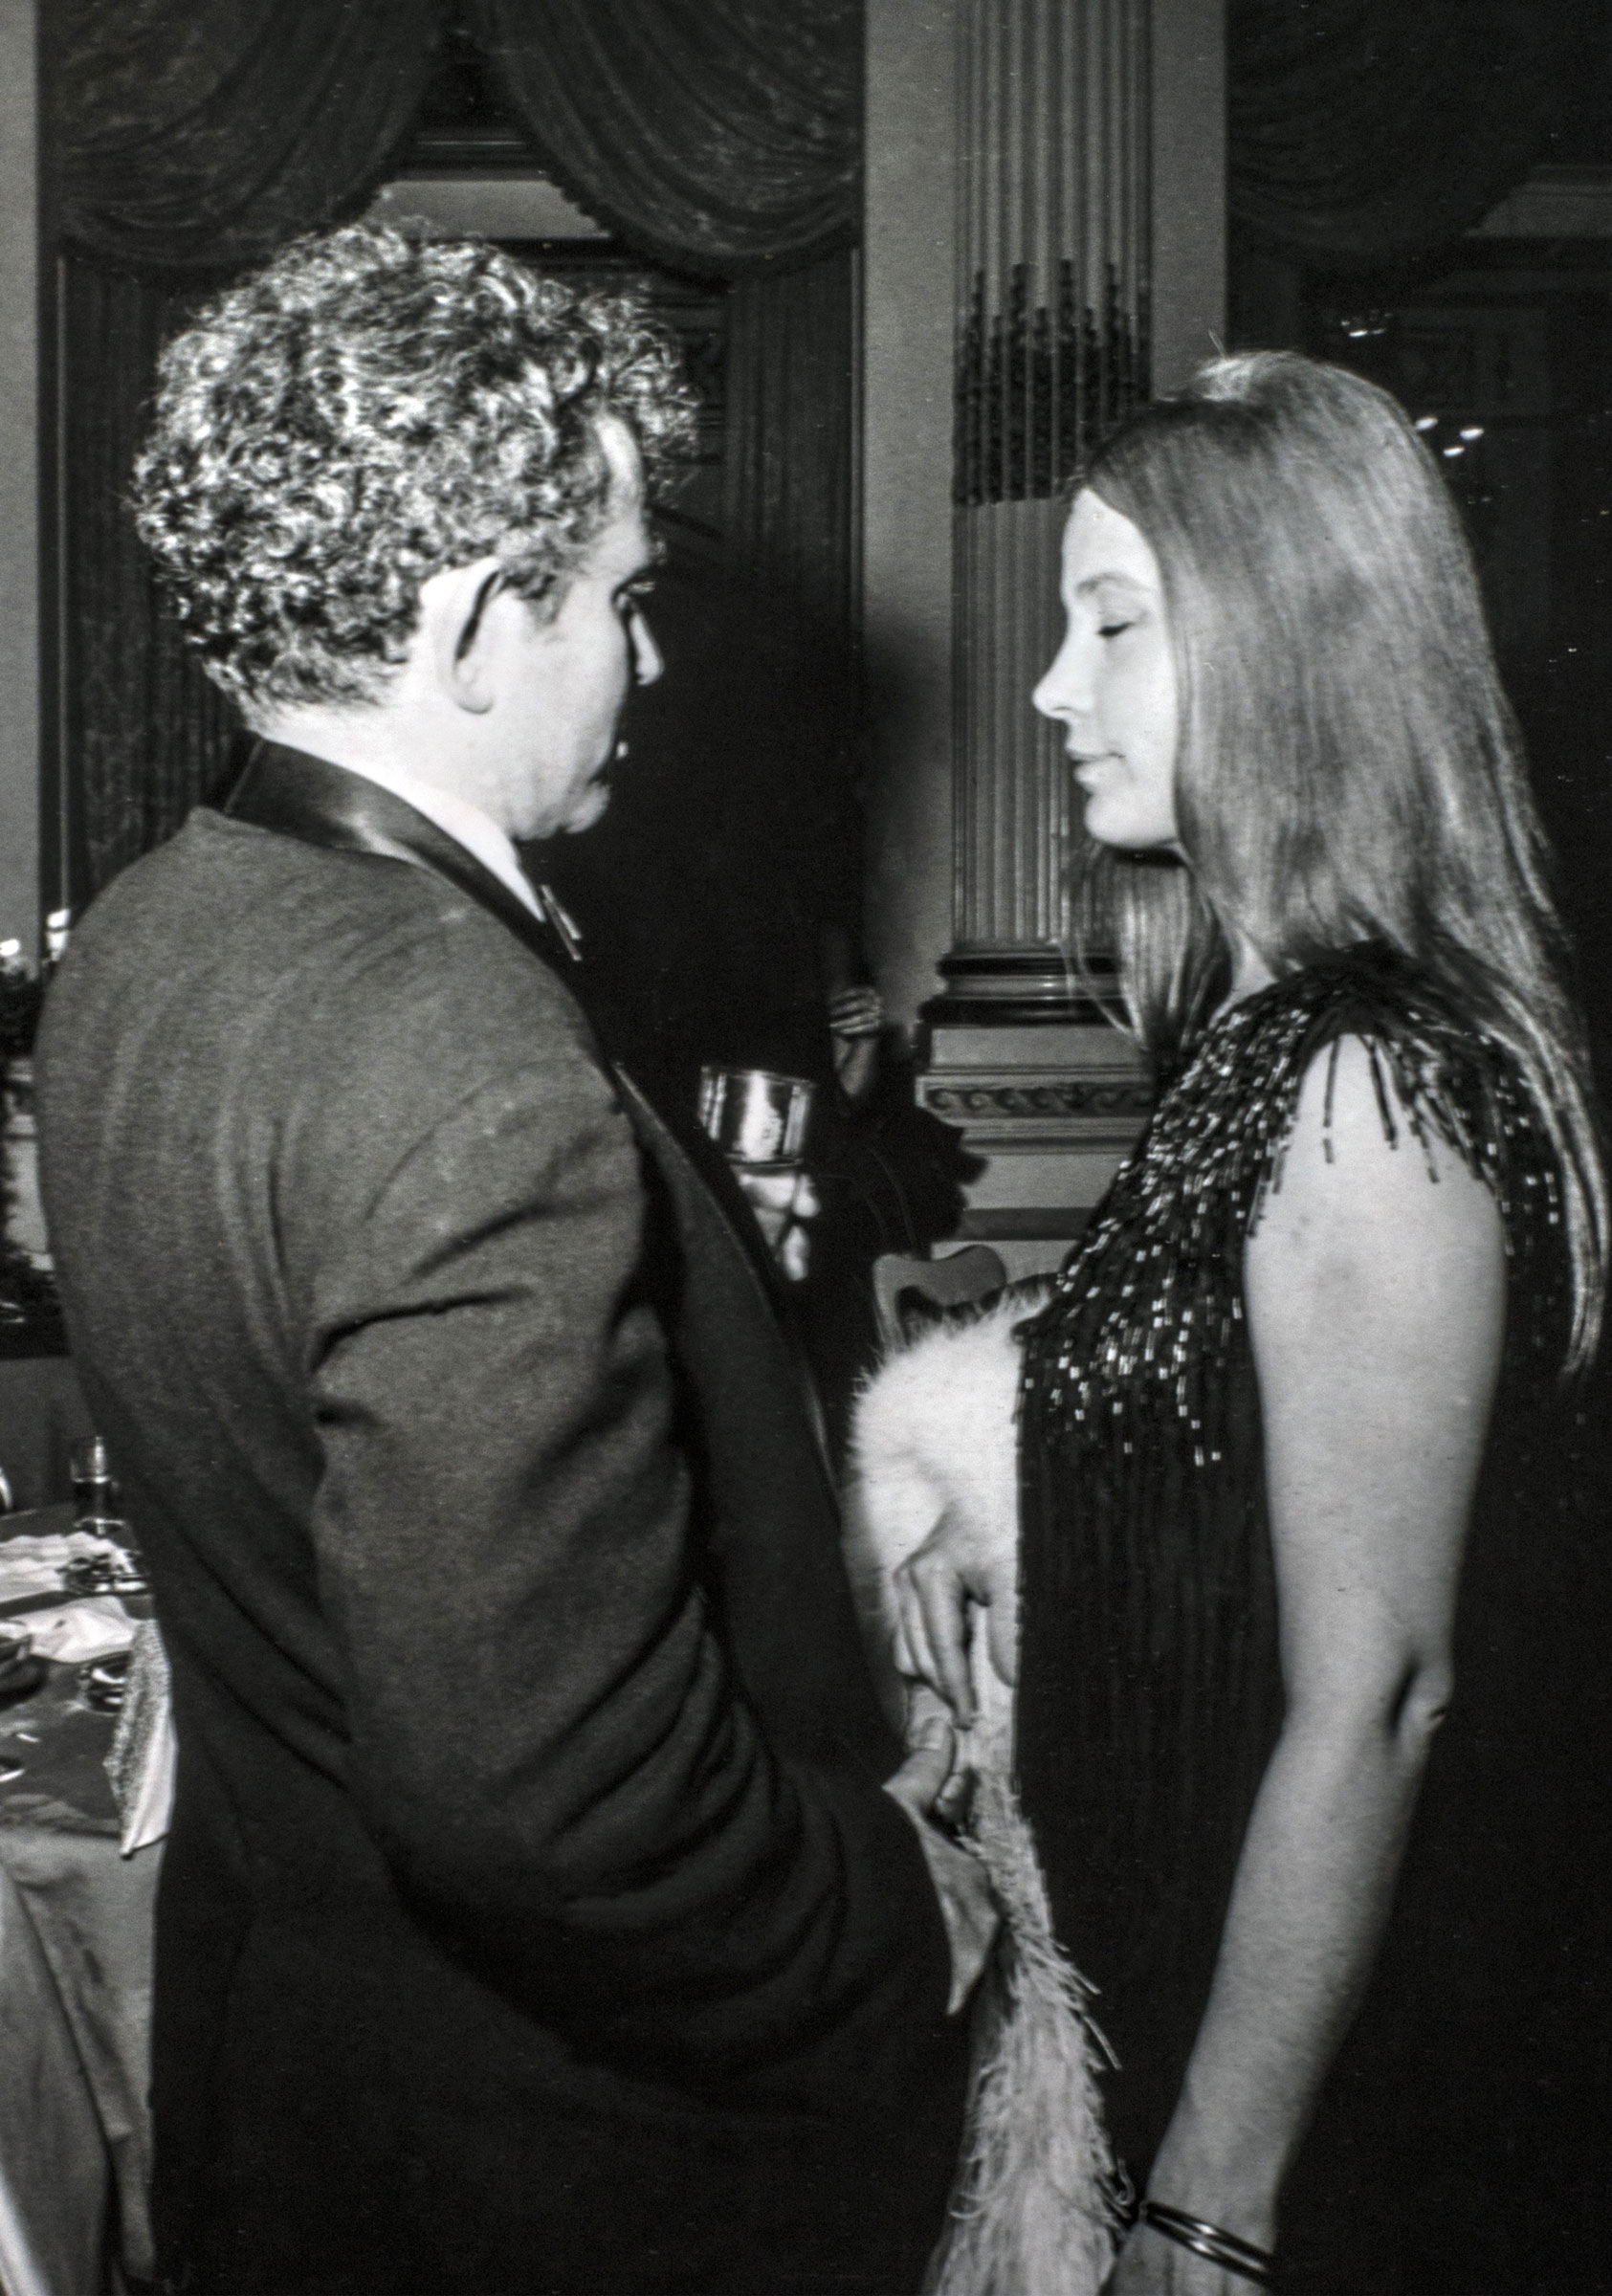 Norman Mailer with wife Beverly Bentley at the ball.